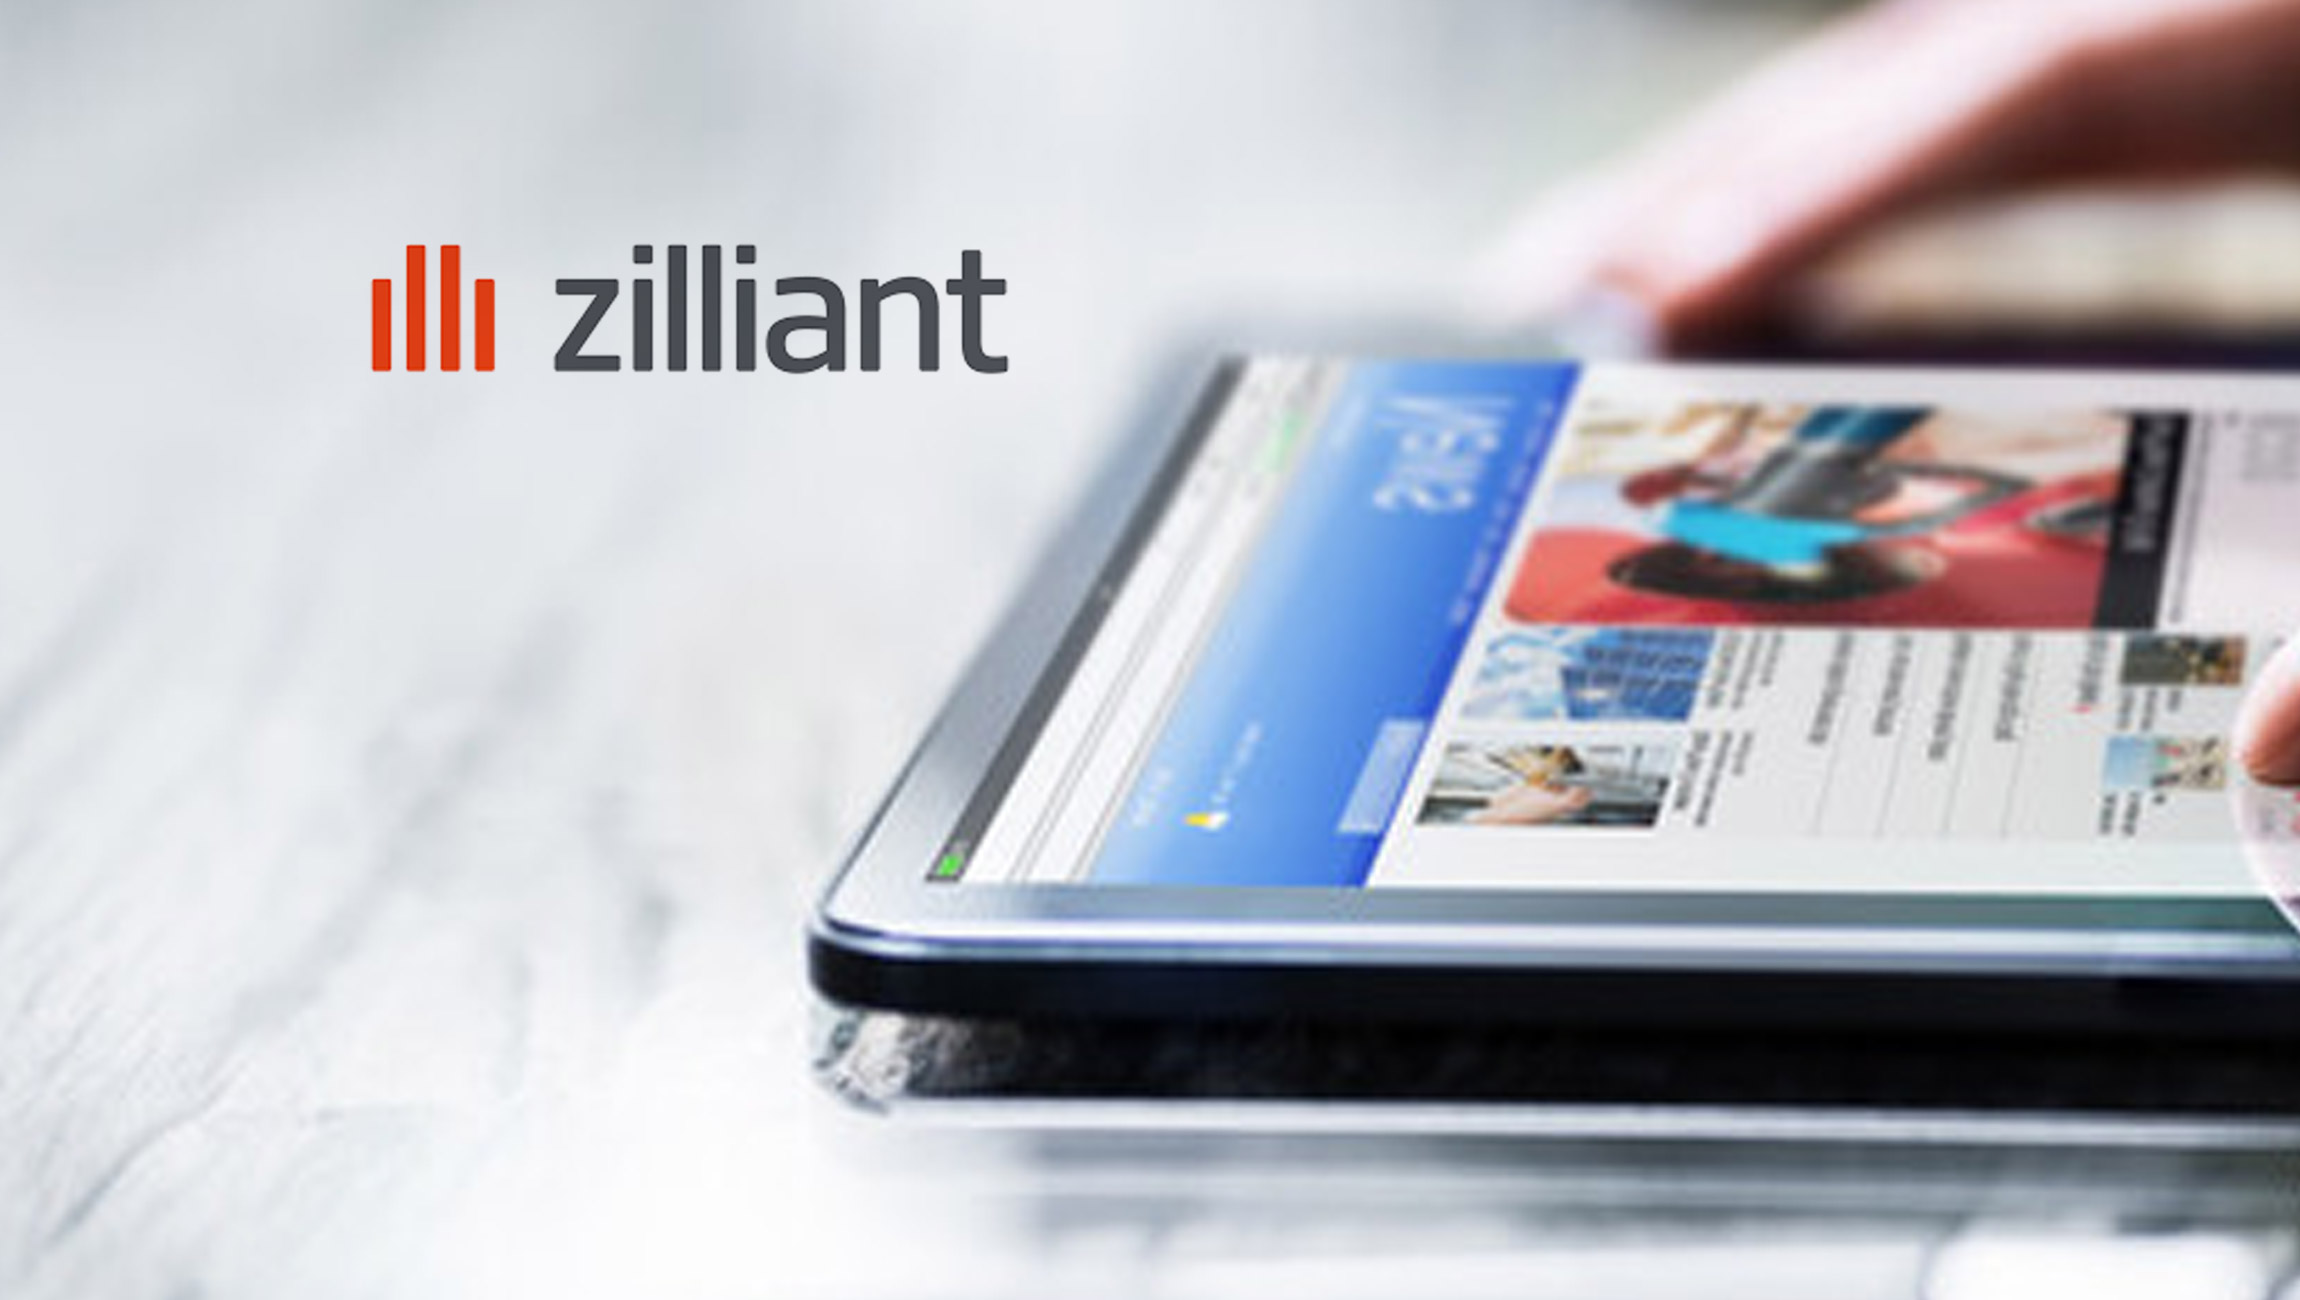 Zilliant Introduces Real-Time Pricing Engine to Deliver Dynamic Pricing Capabilities Needed in the Digital Age